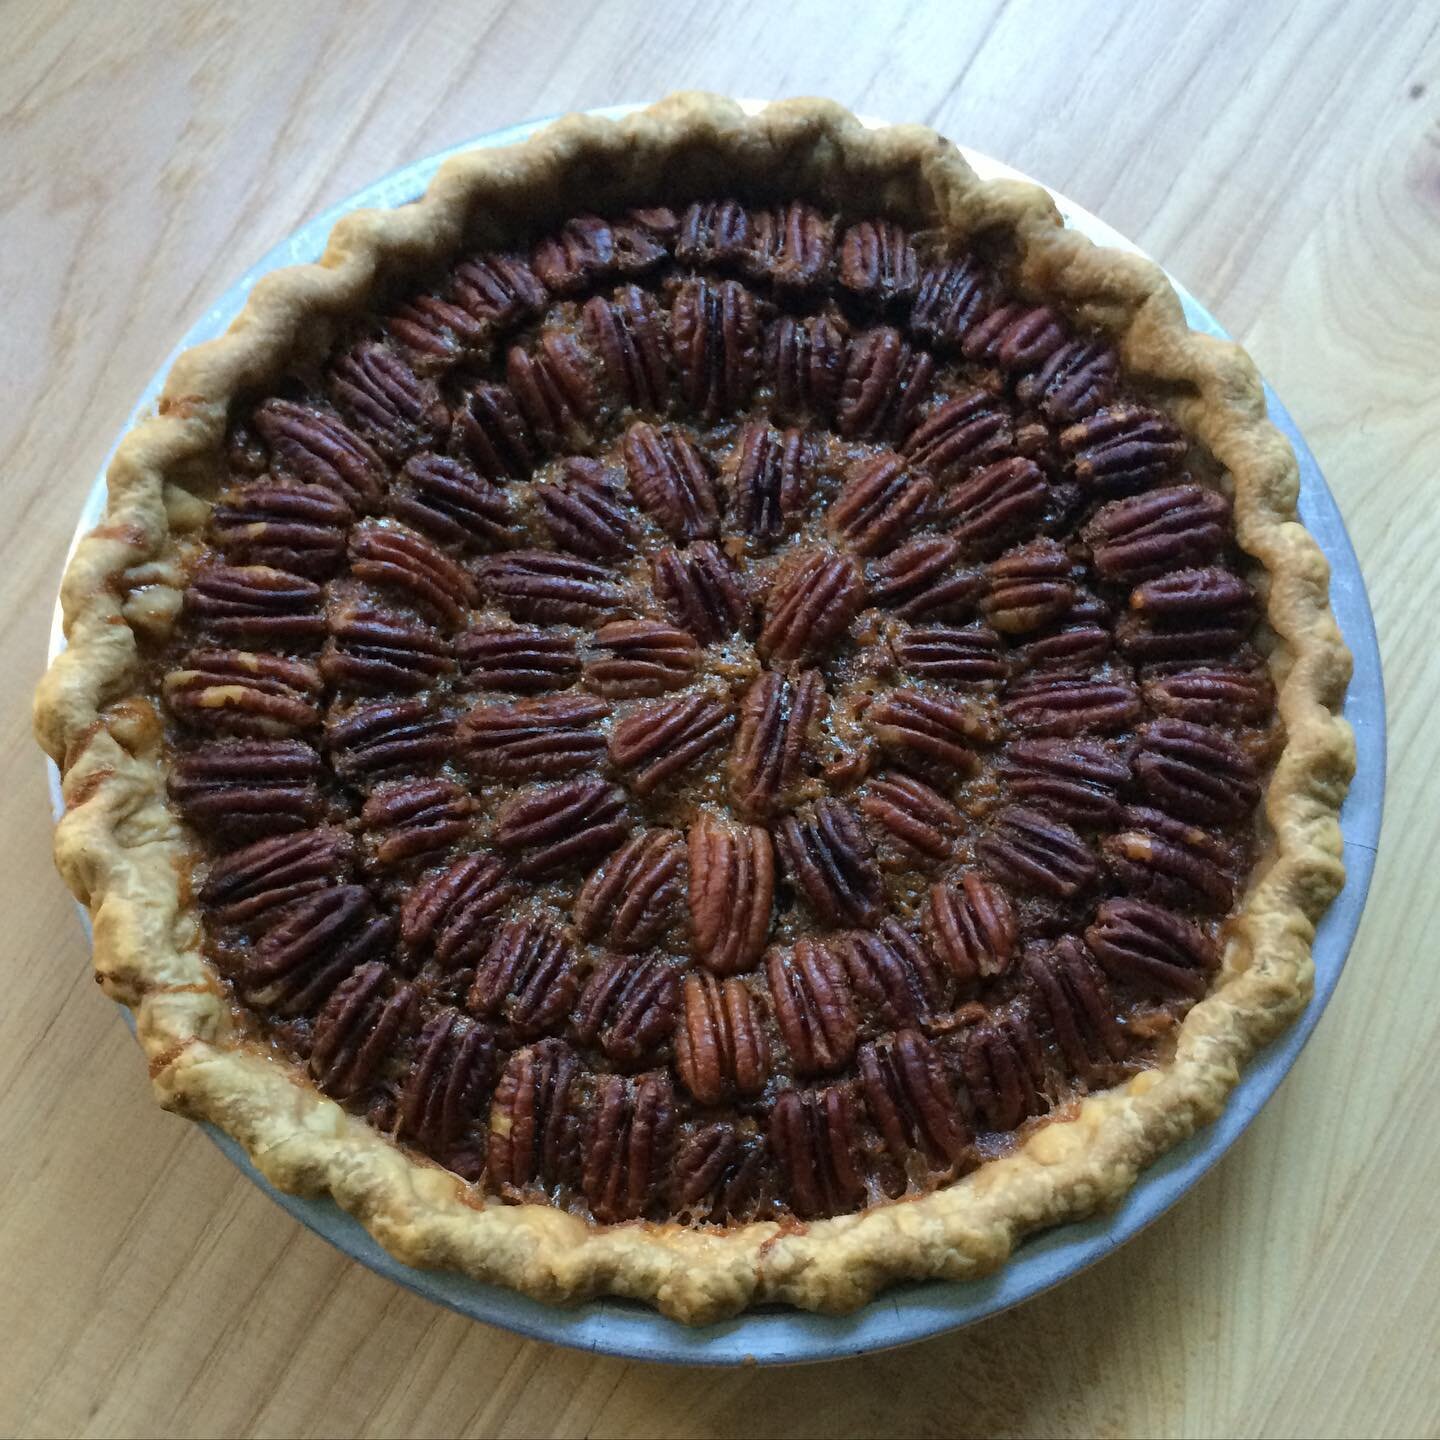 🦃NOW TAKING THANKSGIVING PIE ORDERS! 🥧 We have a limited amount of whole pies available to order for pickup on Wednesday, November 23rd. We&rsquo;ve got Derby pie, Pumpkin pie and Chocolate French Silk pie, $44 each. Please email us at: orders@bitt